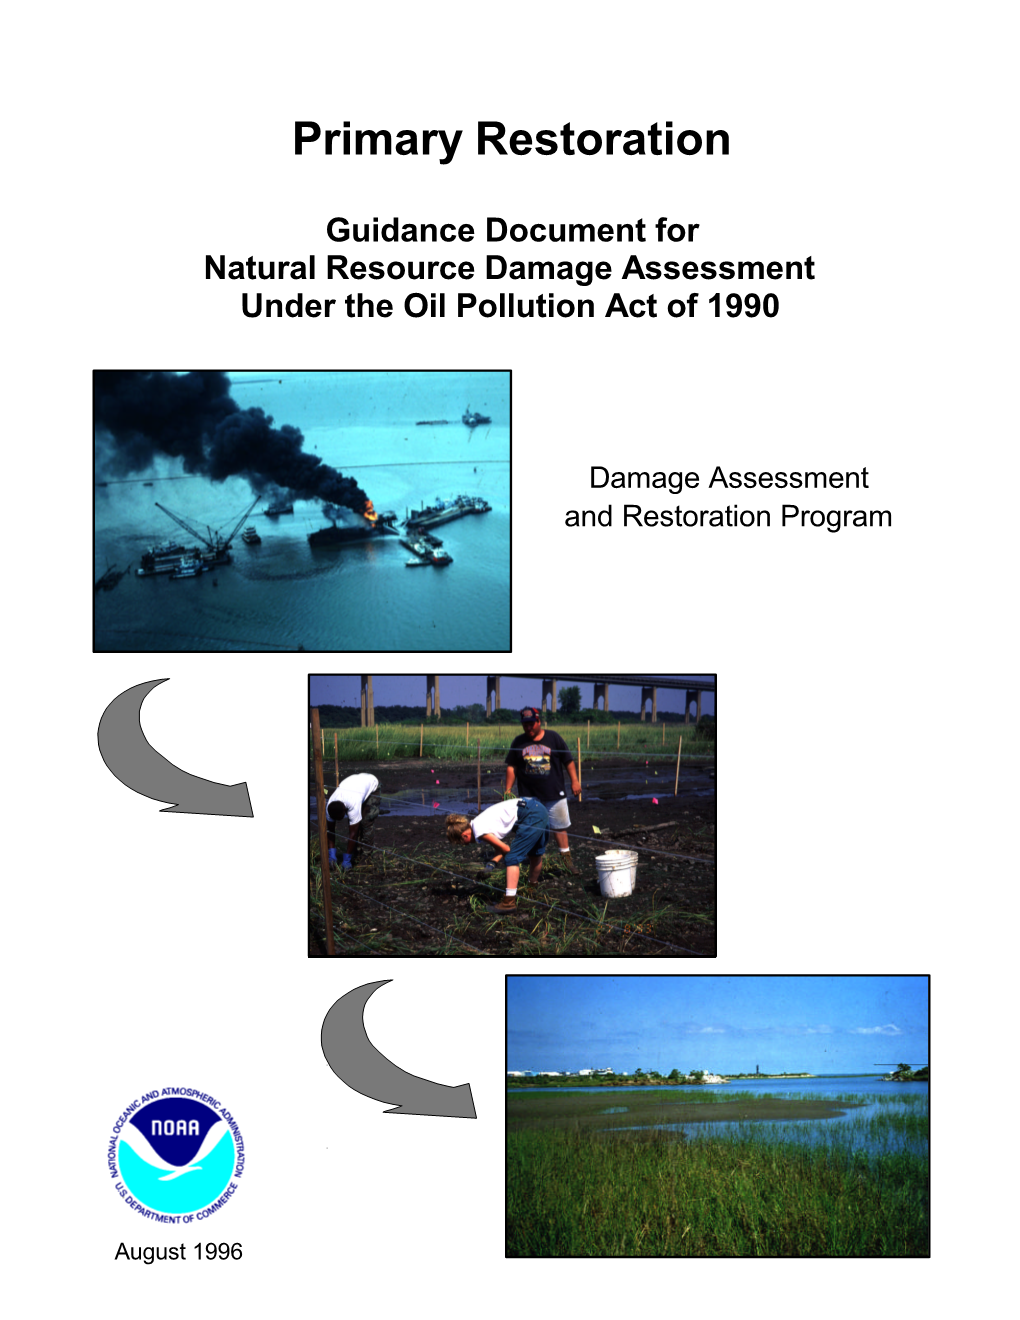 Primary Restoration Guidance Document for Natural Resource